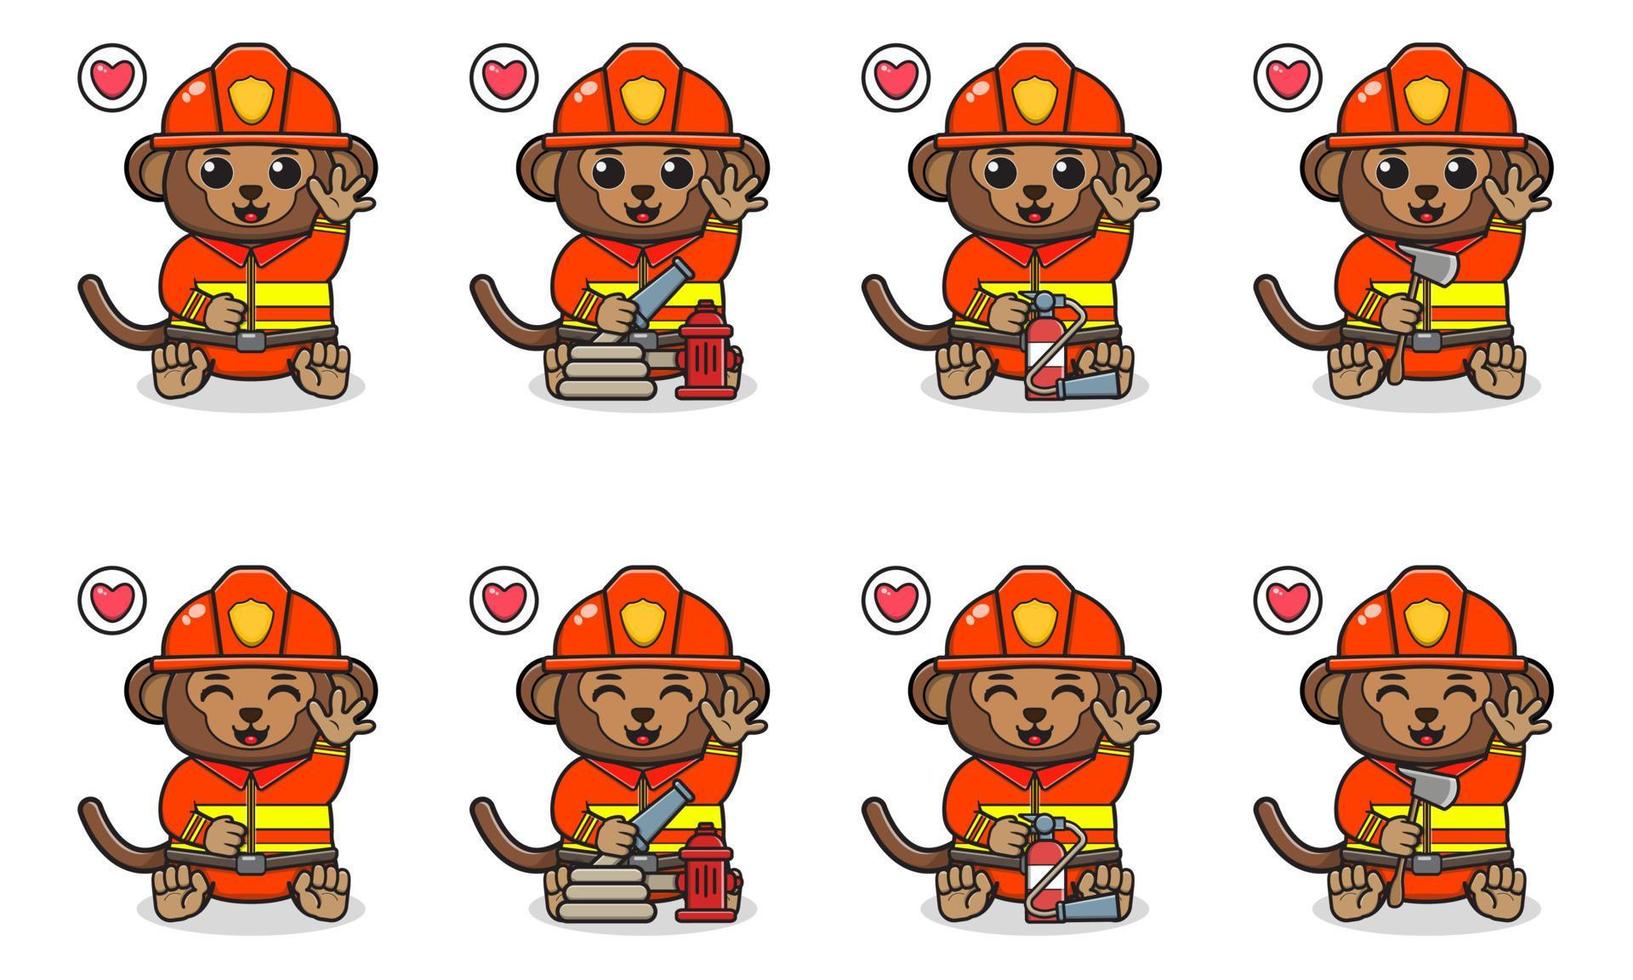 Vector Illustration of Cute sitting Monkey cartoon with Firefighter costume and hand up pose.